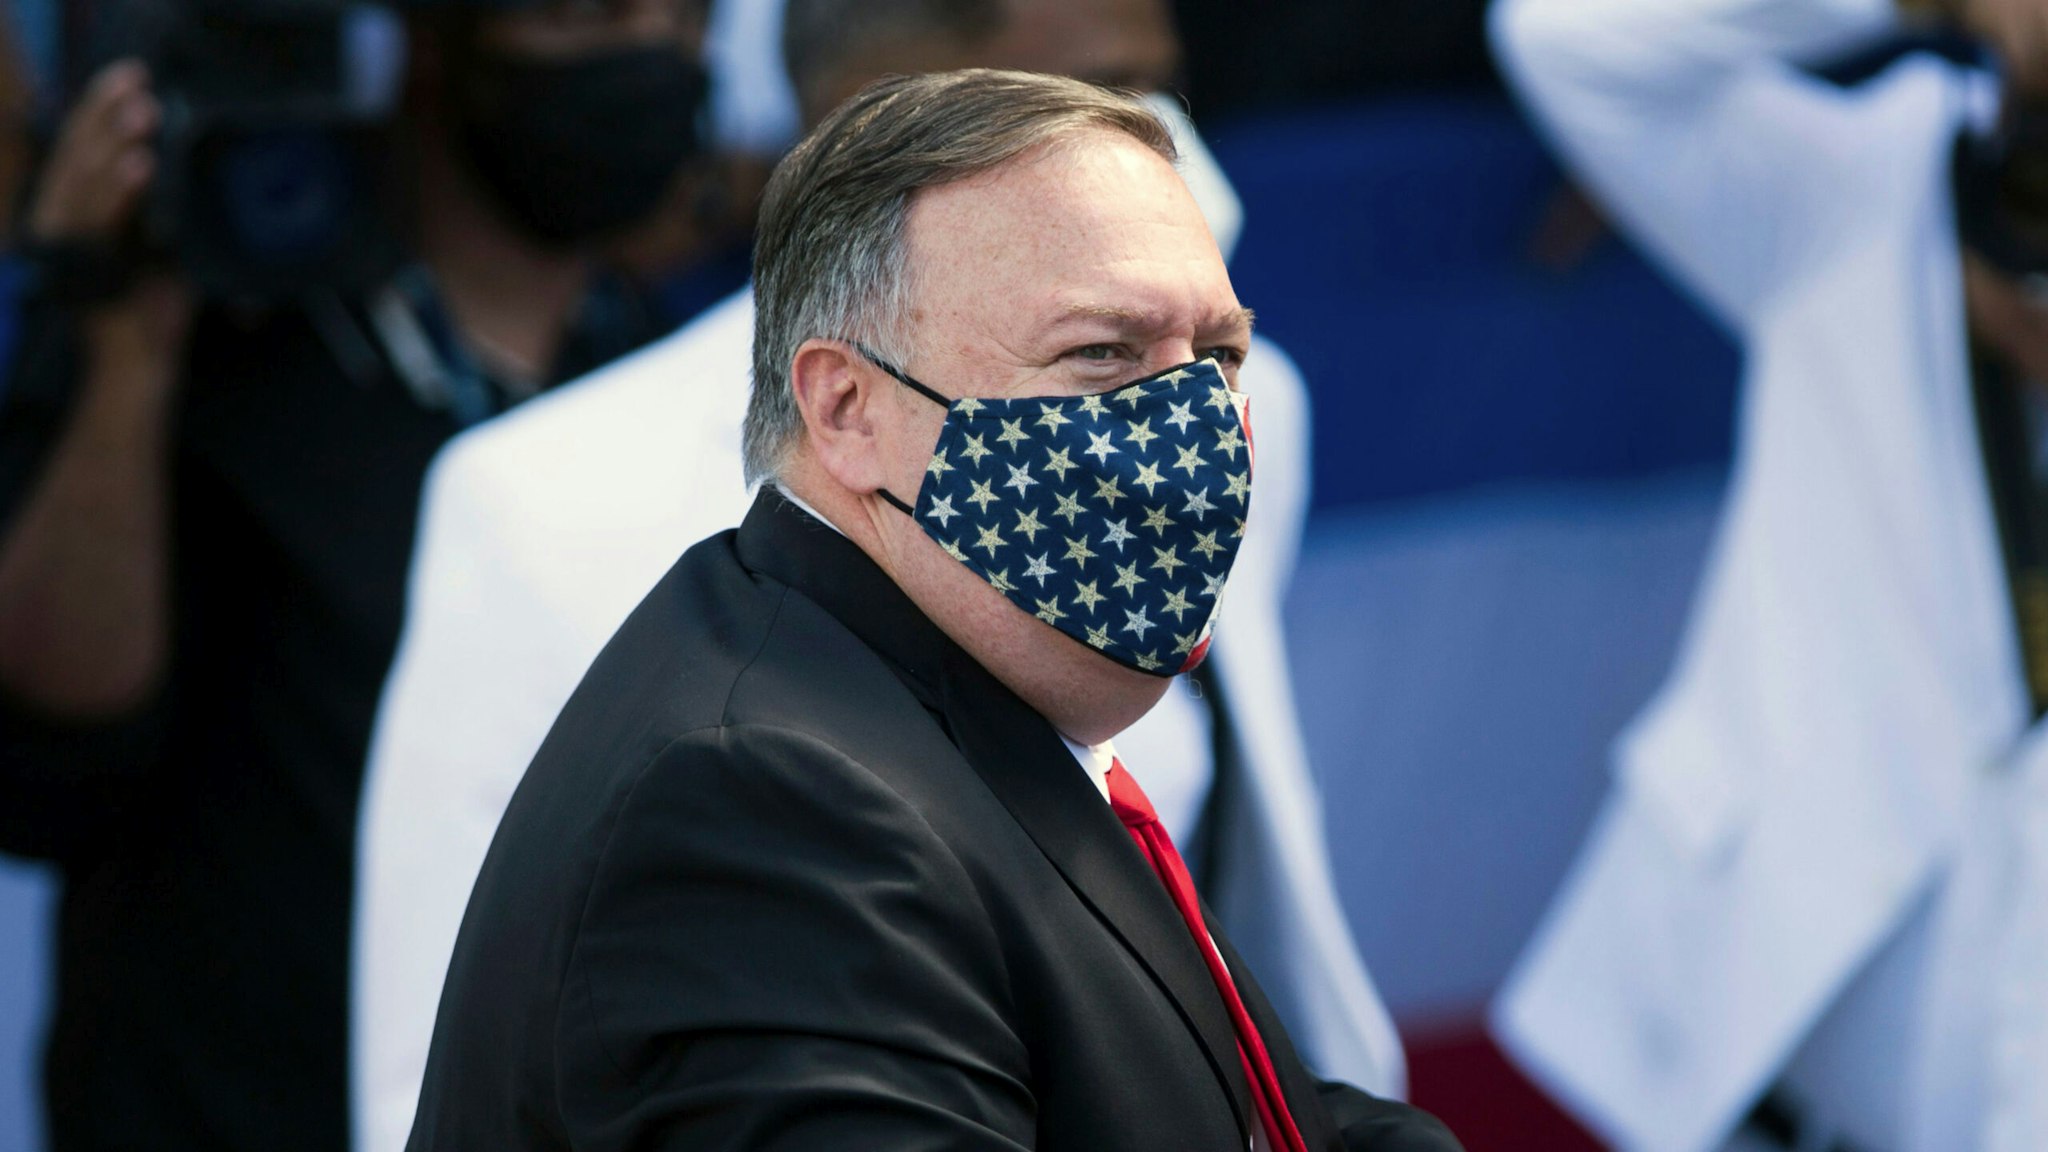 US Secretary of State Mike Pompeo walks upon arrival at the National Congress to attend the inauguration ceremony of Dominican new President Luis Abinader, in Santo Domingo, on August 16, 2020. - Luis Abinader, of the Modern Revolutionary Party,is a politician, economist and businessman who will be sworn for a four-year term as the sixty-seventh president of the Dominican Republic.